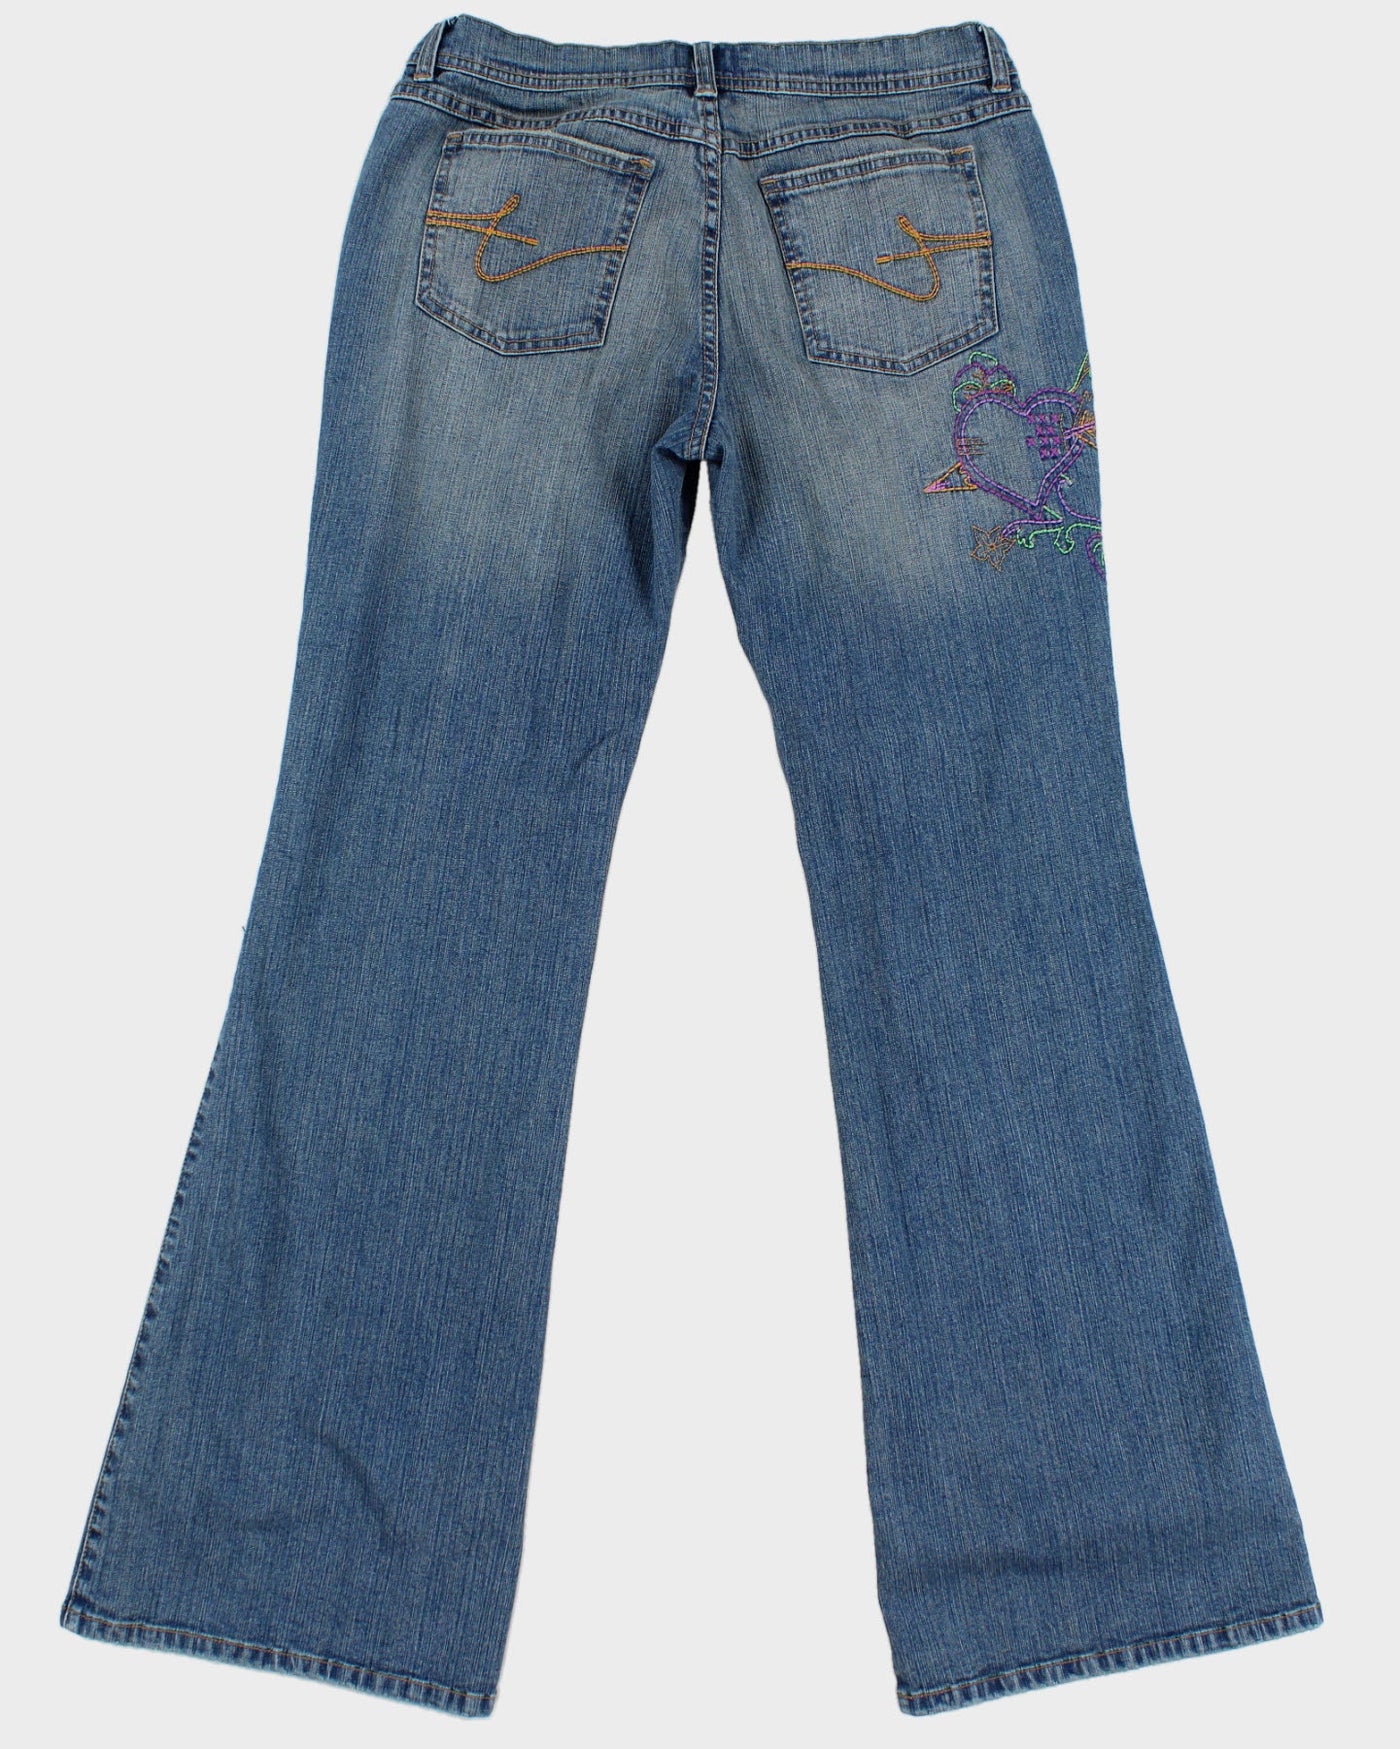 Y2K 00s Tommy Jeans Floral Embroidery Low Rise Denim Jeans - W30